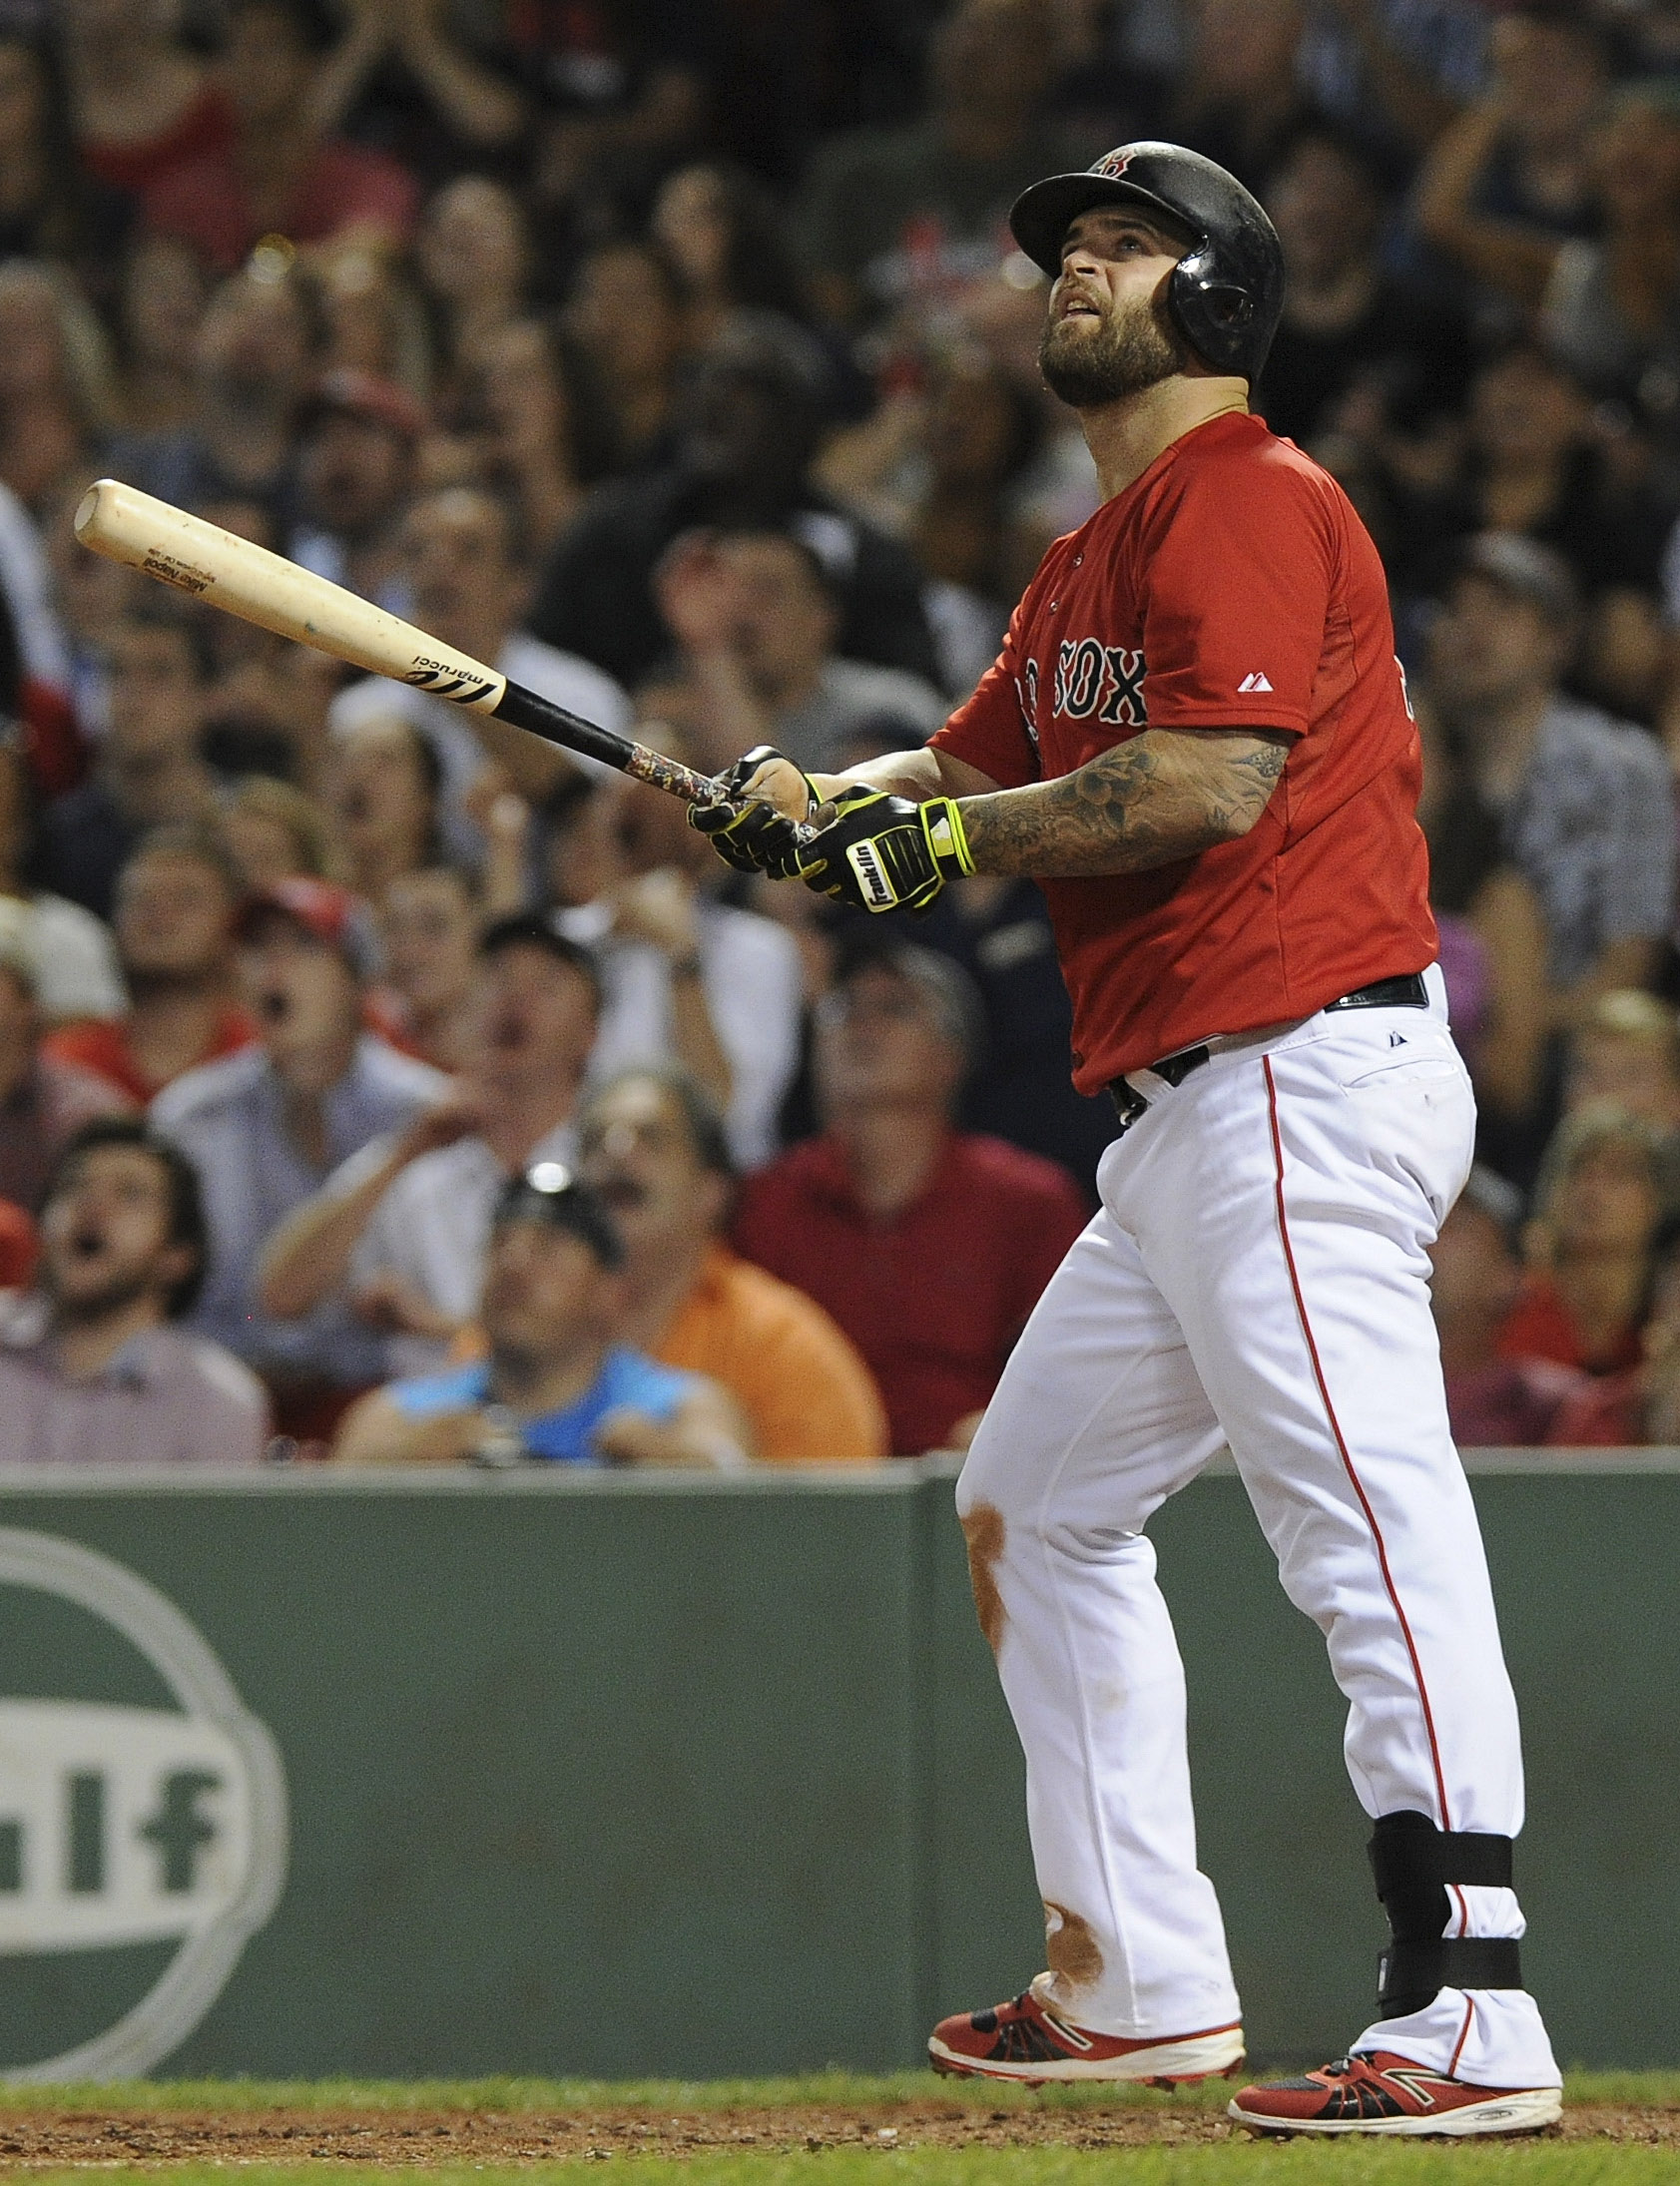 Mike Napoli, Red Sox agree on 2-year deal - The Boston Globe